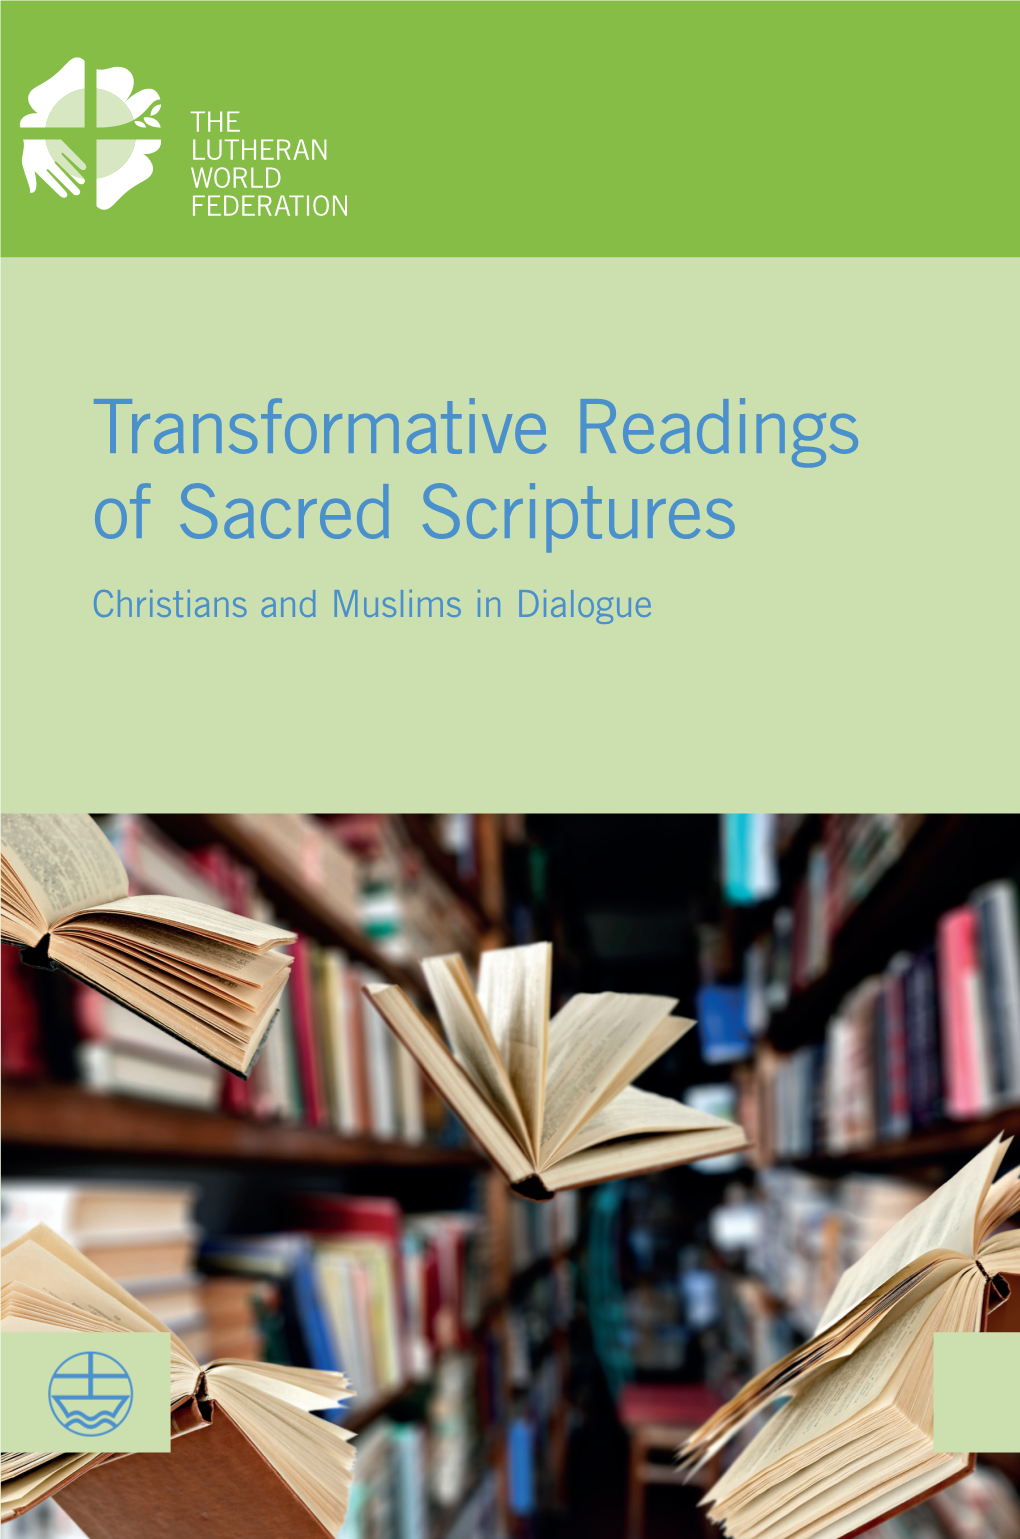 Transformative Readings of Sacred Scriptures: Christians and Muslims in Dialogue Documentation 62/2017